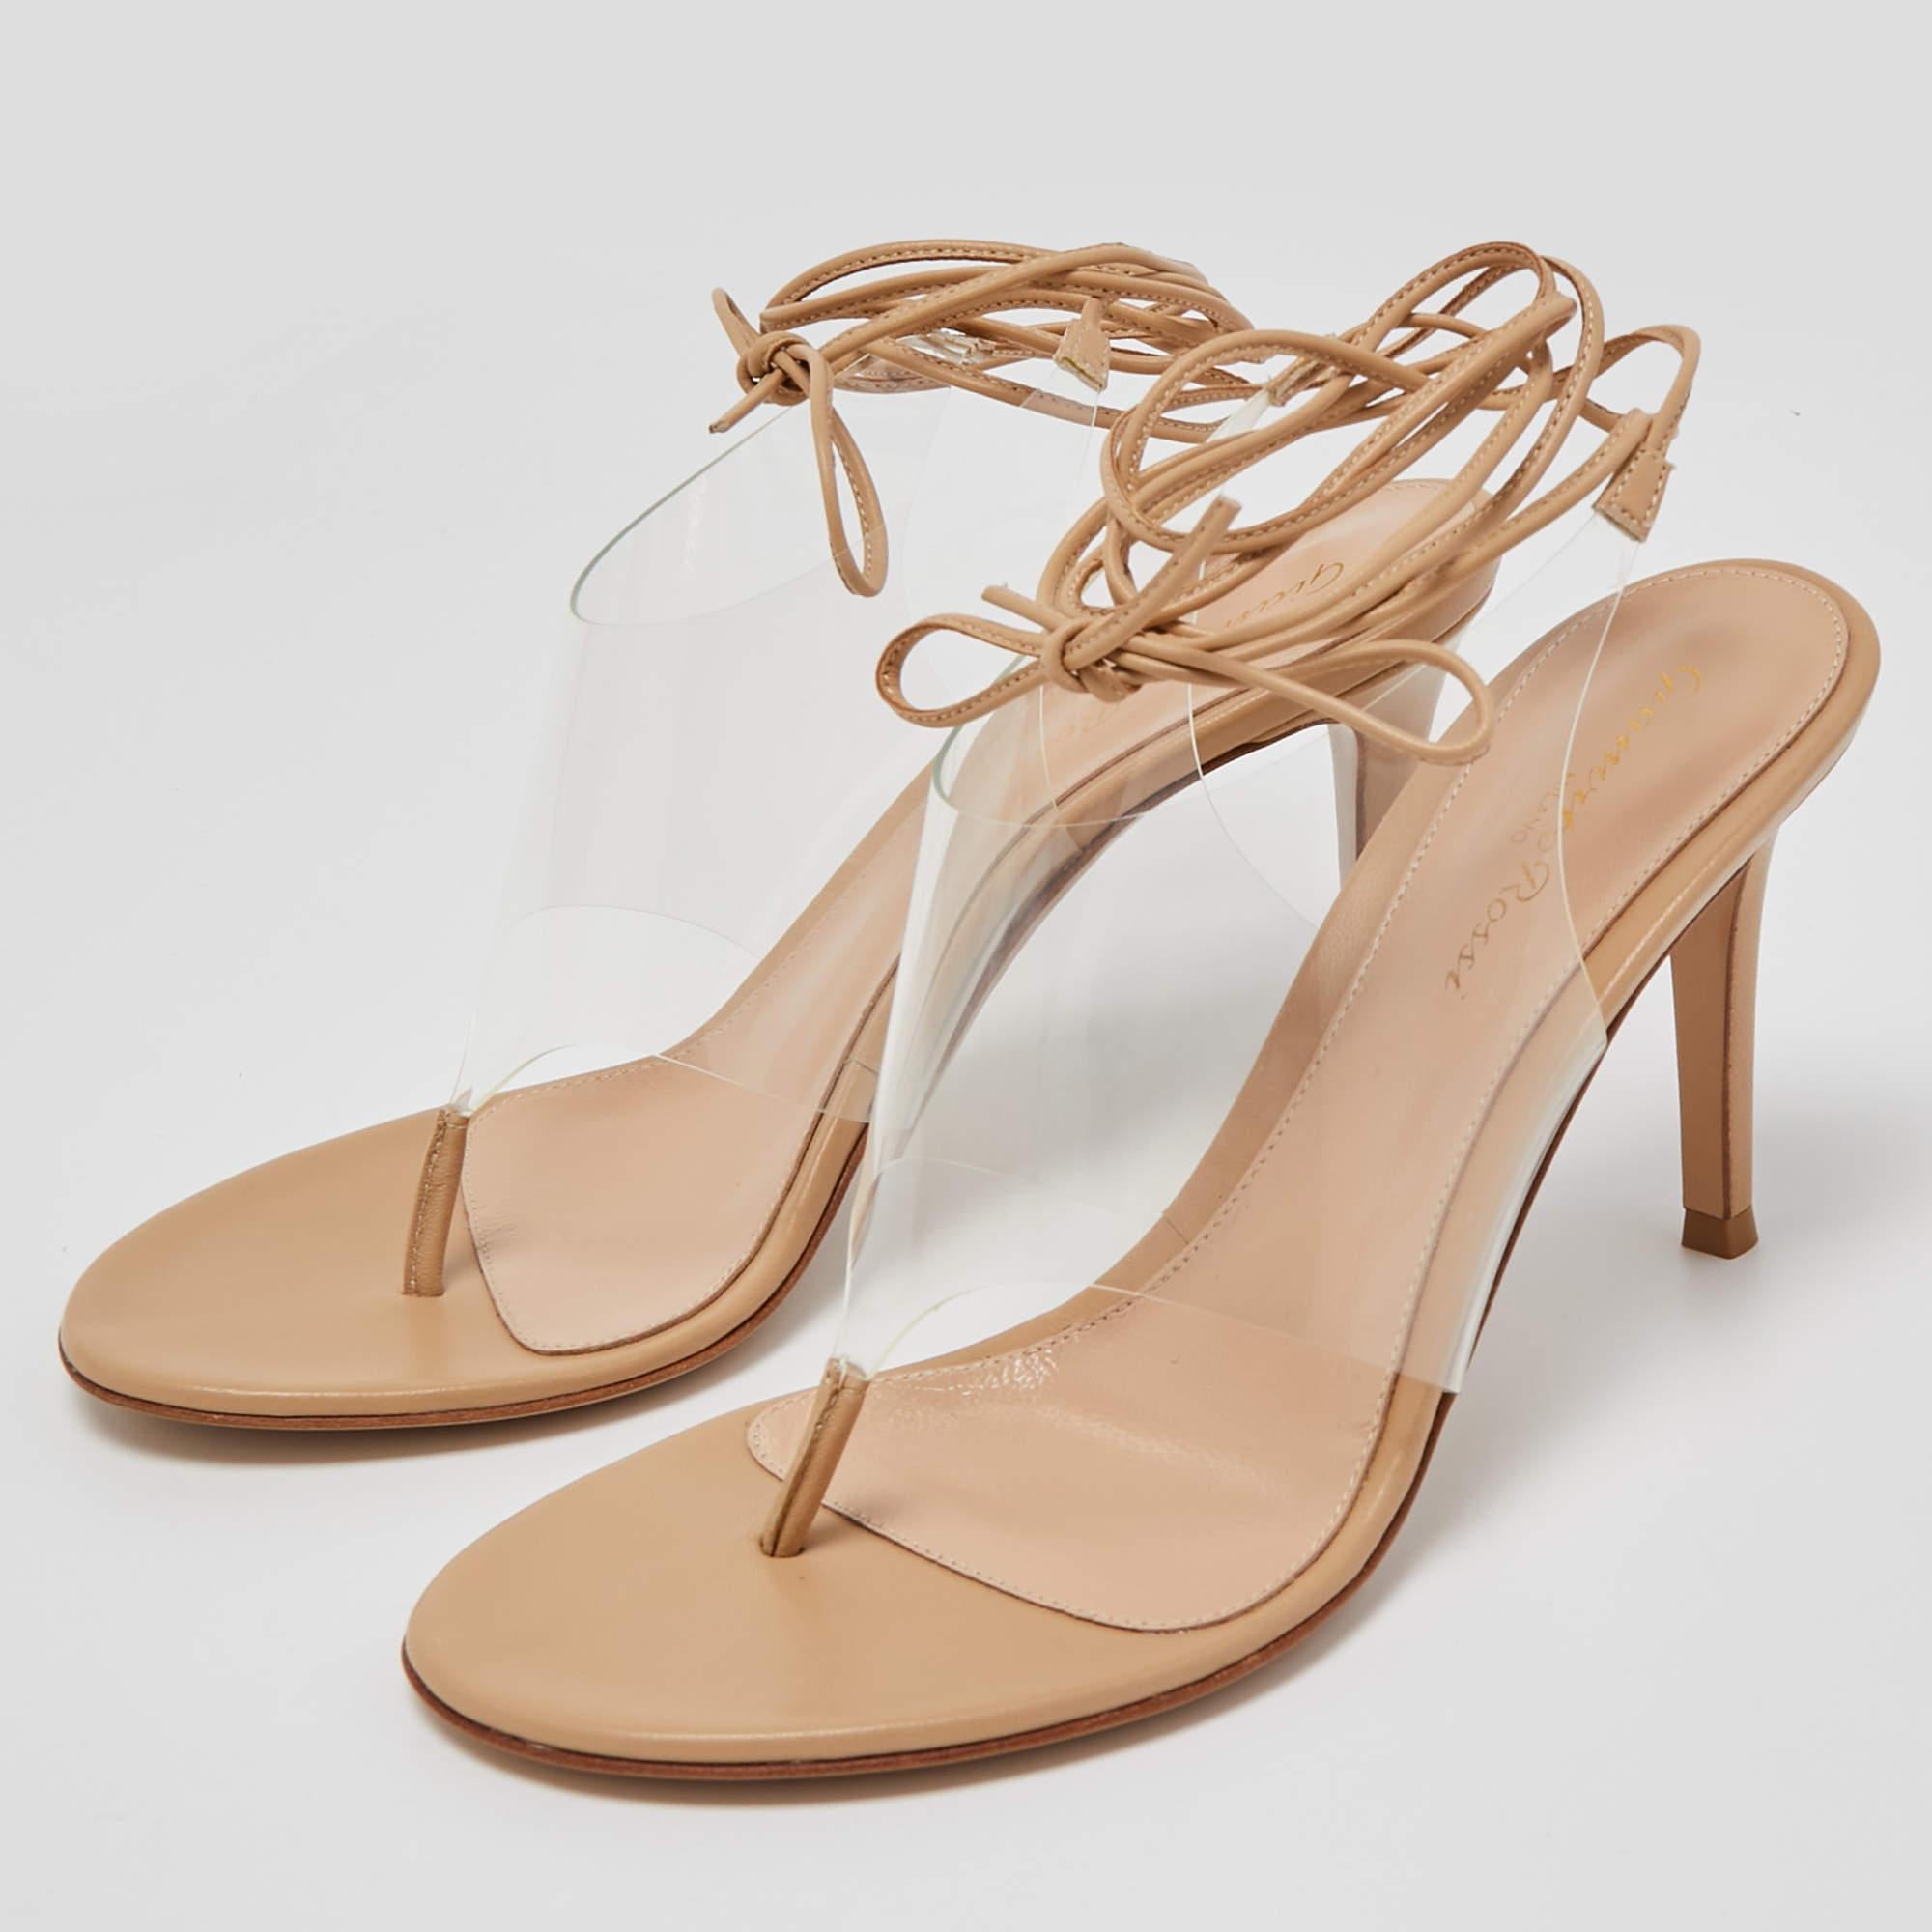 Gianvito Rossi Beige Leather and PVC Ankle Wrap Sandals Size 36 4